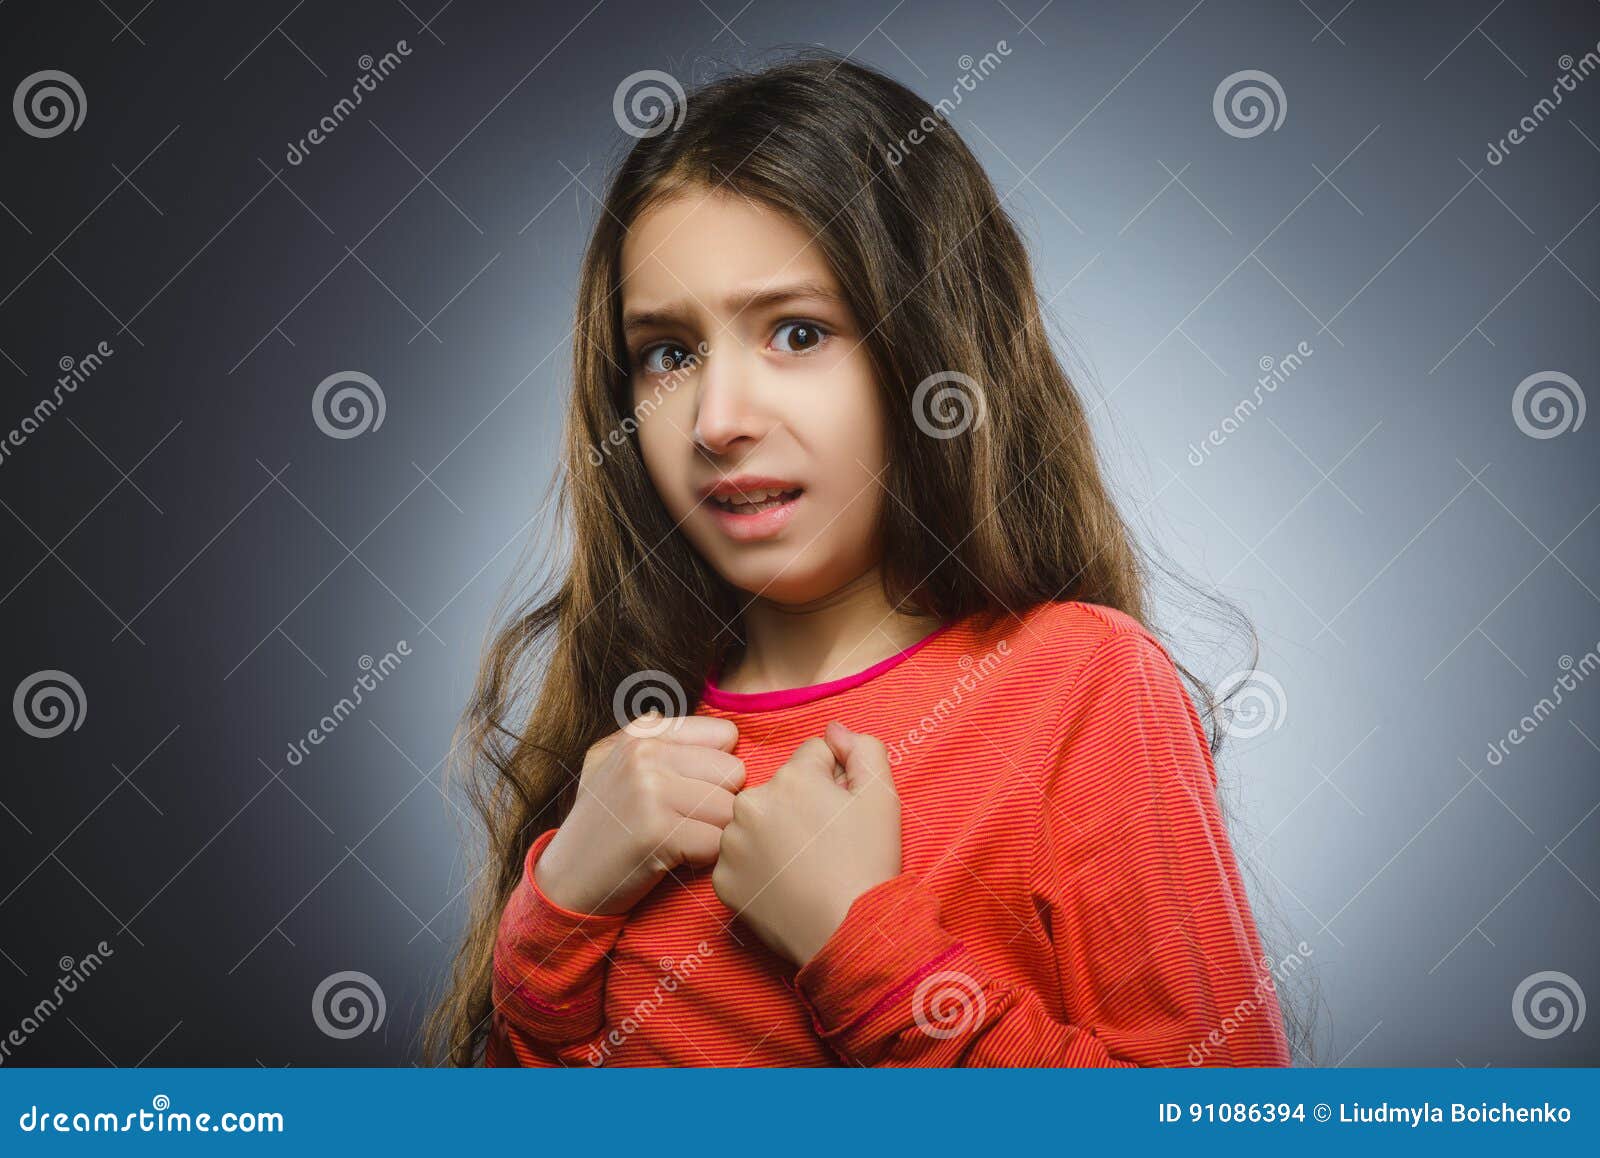 https://thumbs.dreamstime.com/z/closeup-scared-shocked-little-girl-human-emotion-face-expression-91086394.jpg